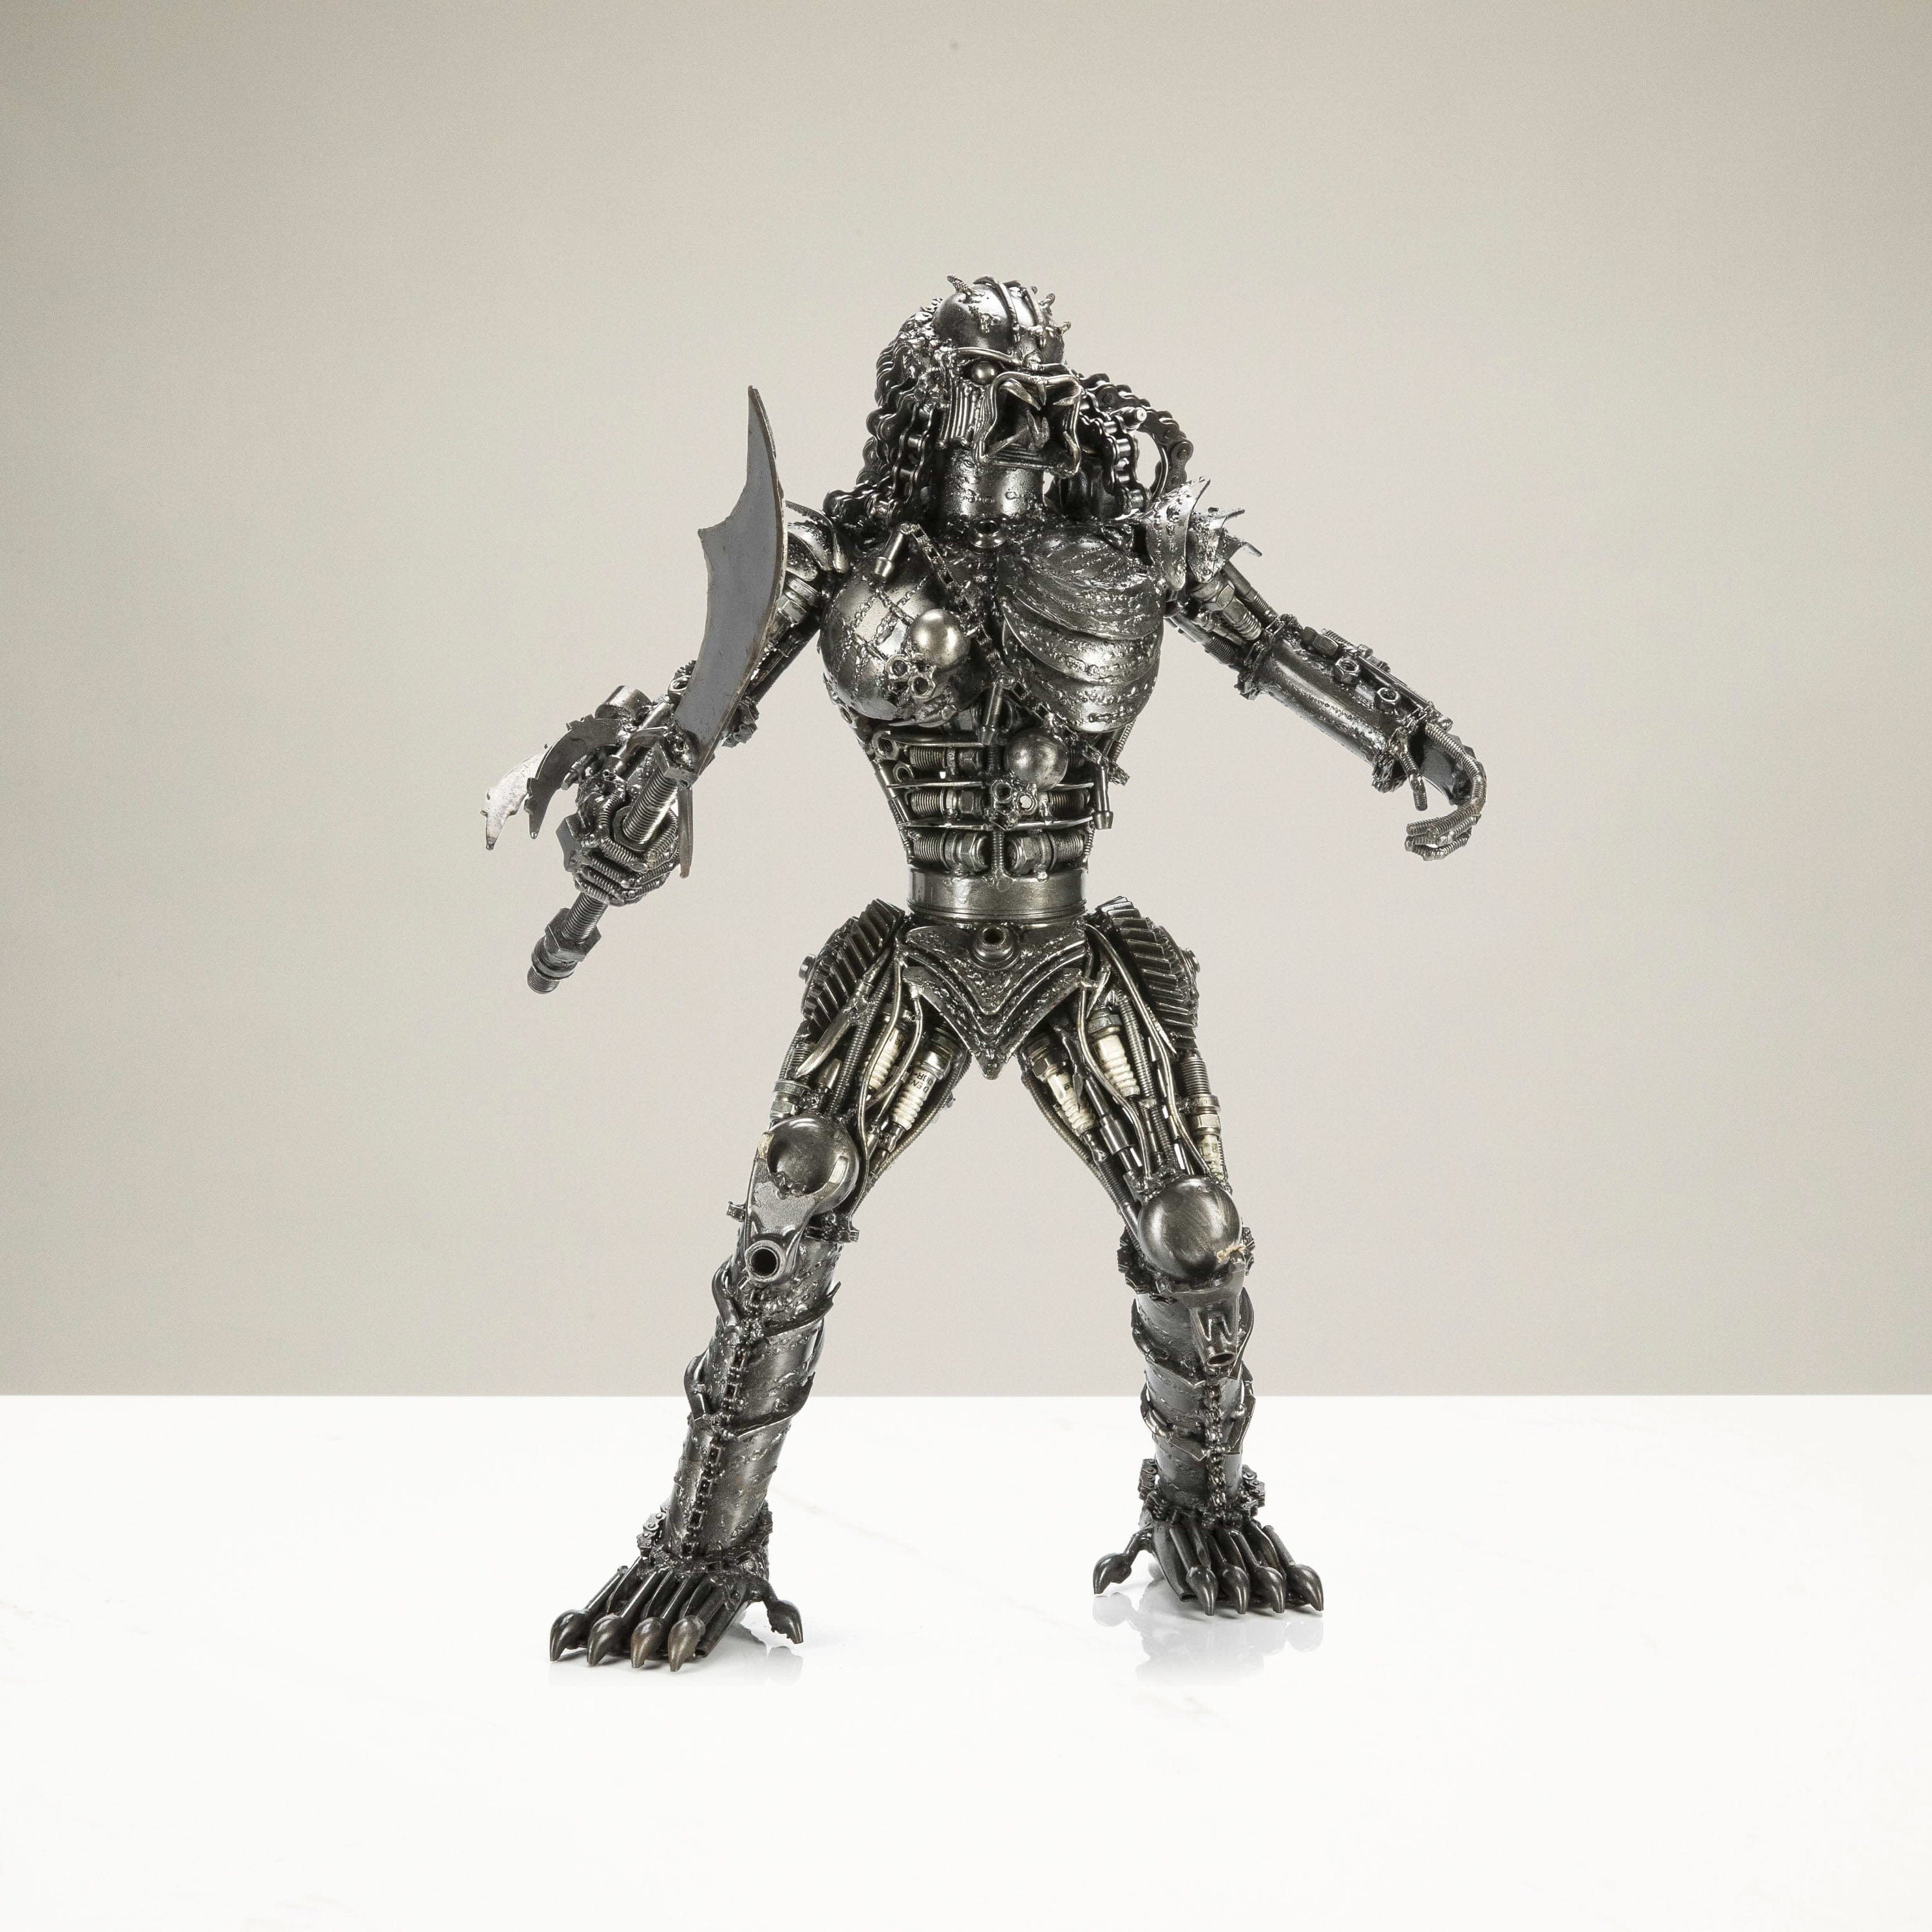 Kalifano Recycled Metal Art 23" Predator with Sword Inspired Recycled Metal Sculpture RMS-P58x41-S02